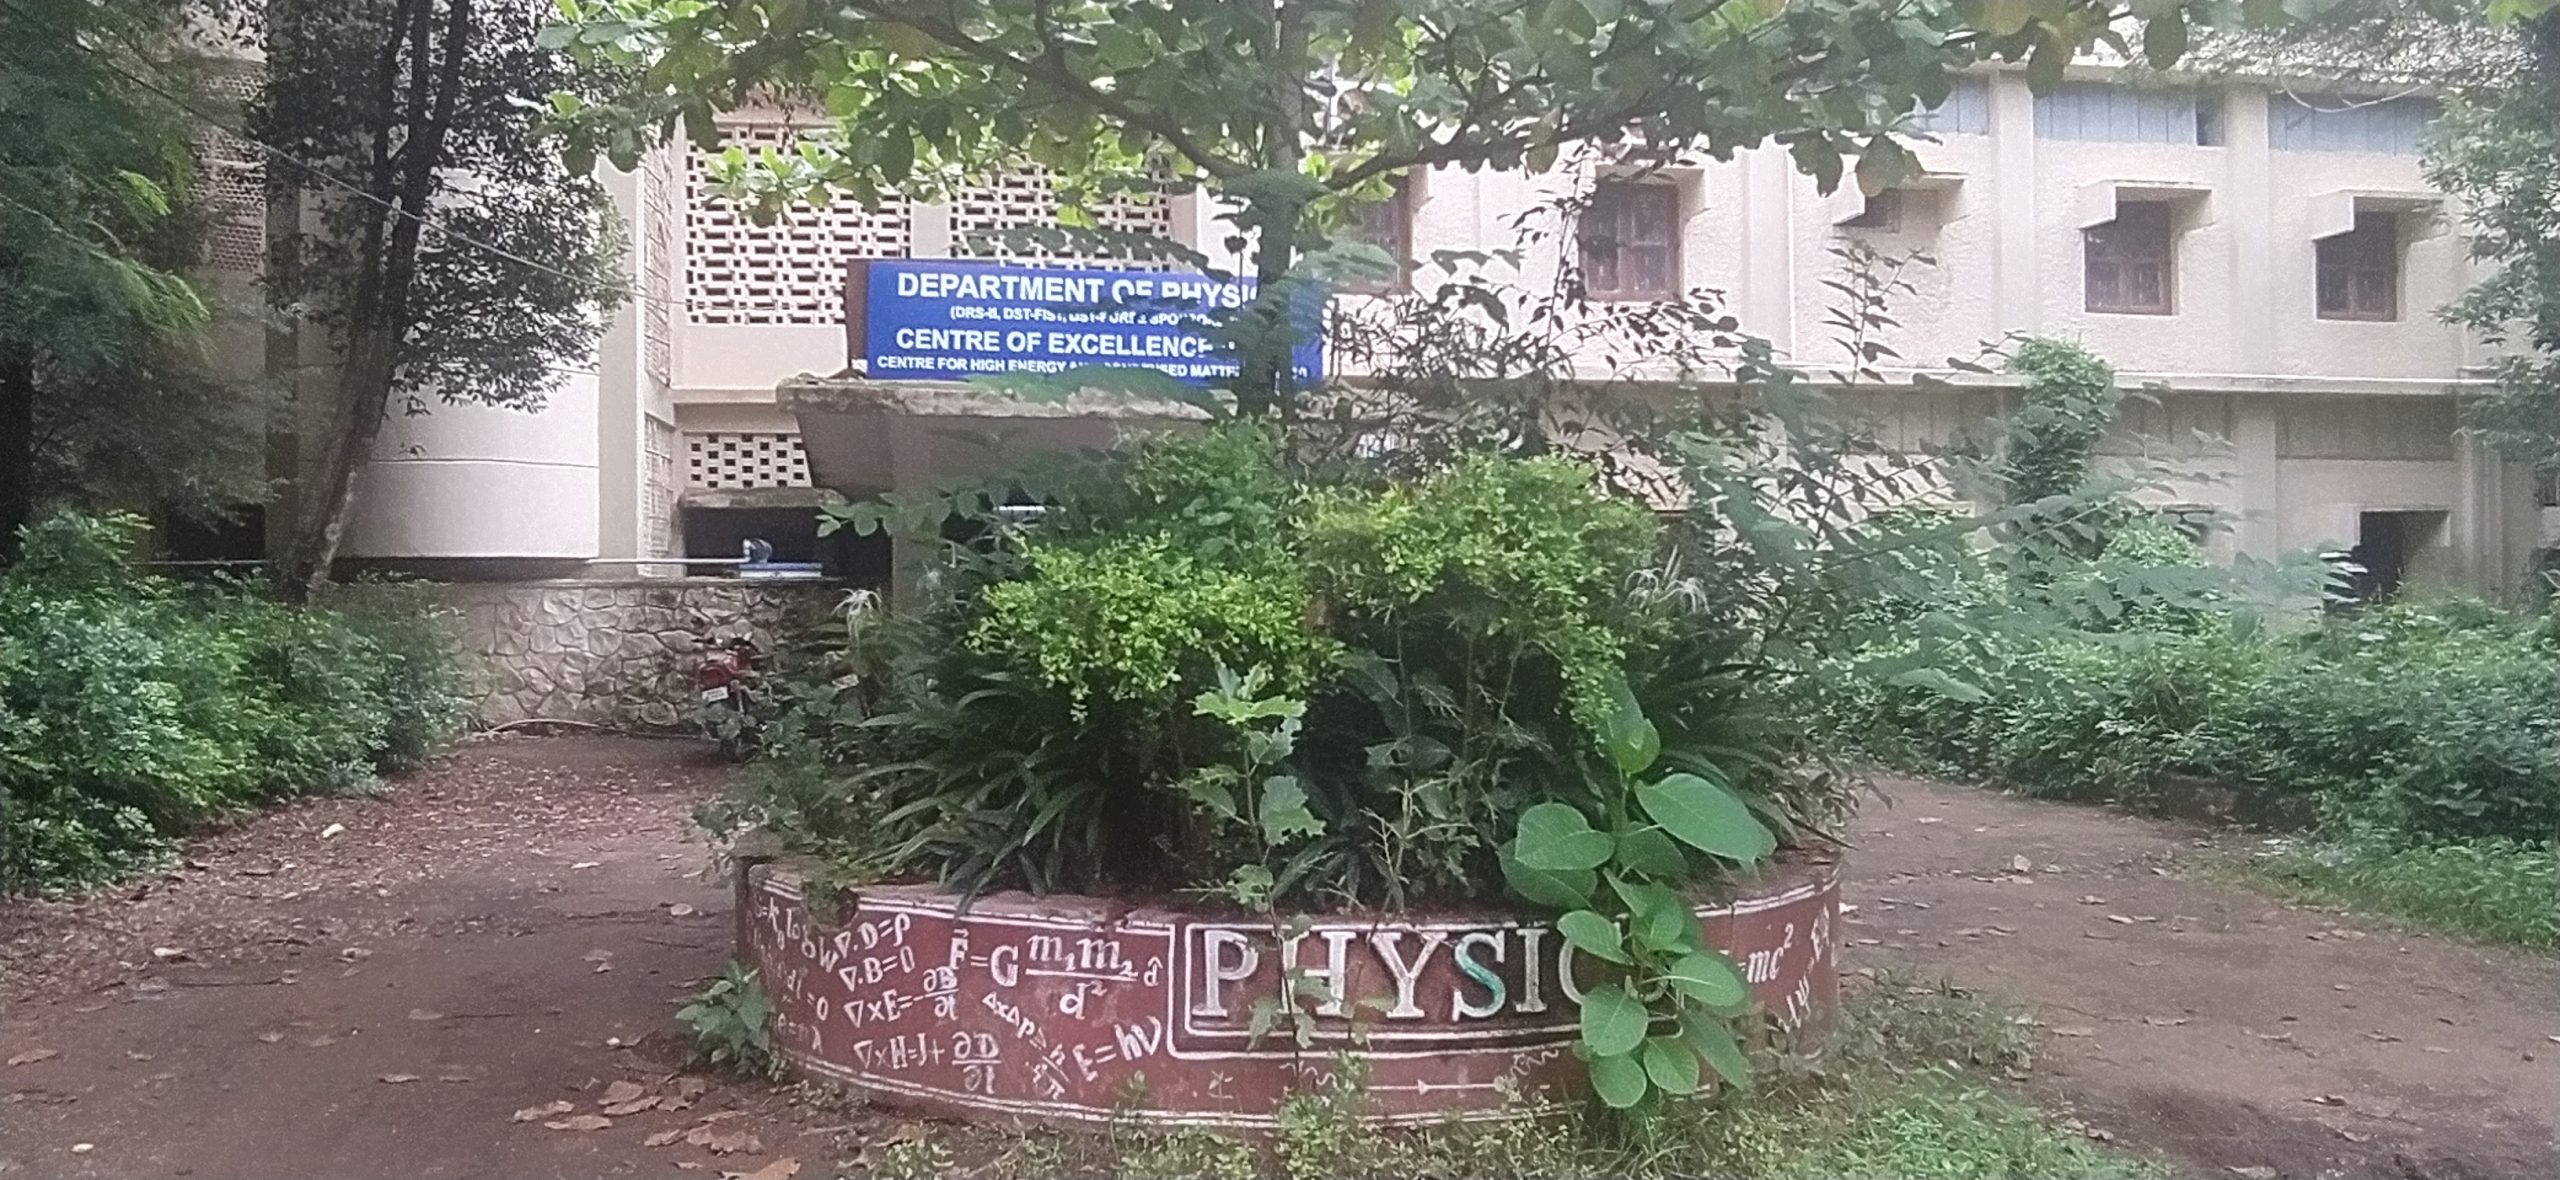 Department of Physics